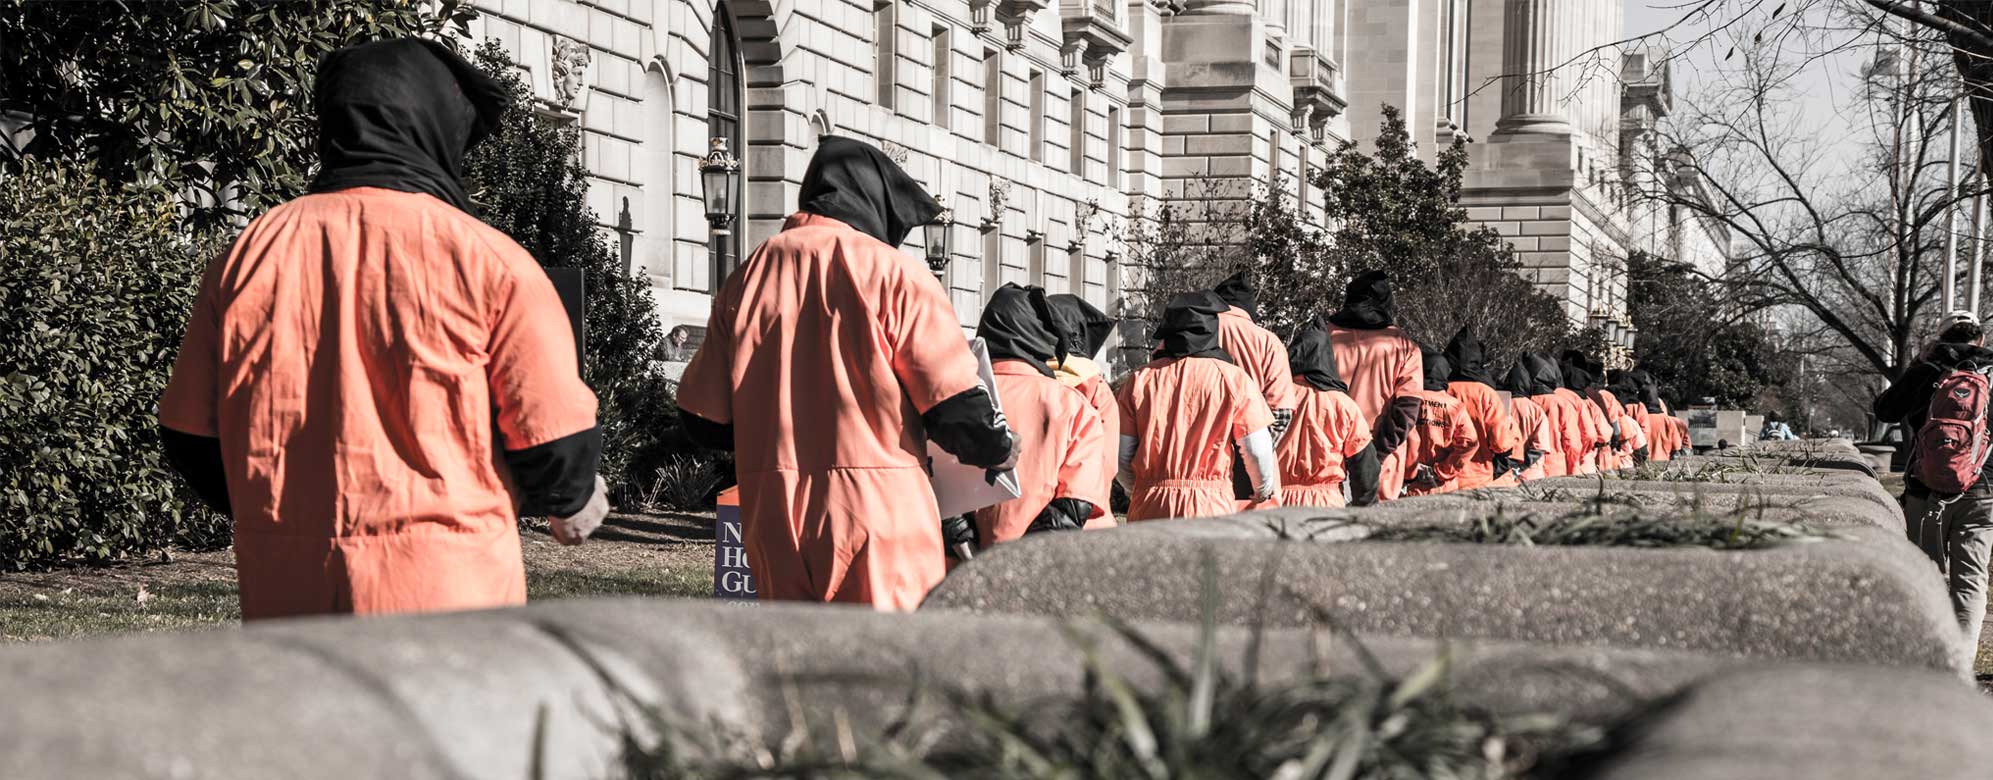 Guantánamo Protesters File Past the Department of Justice